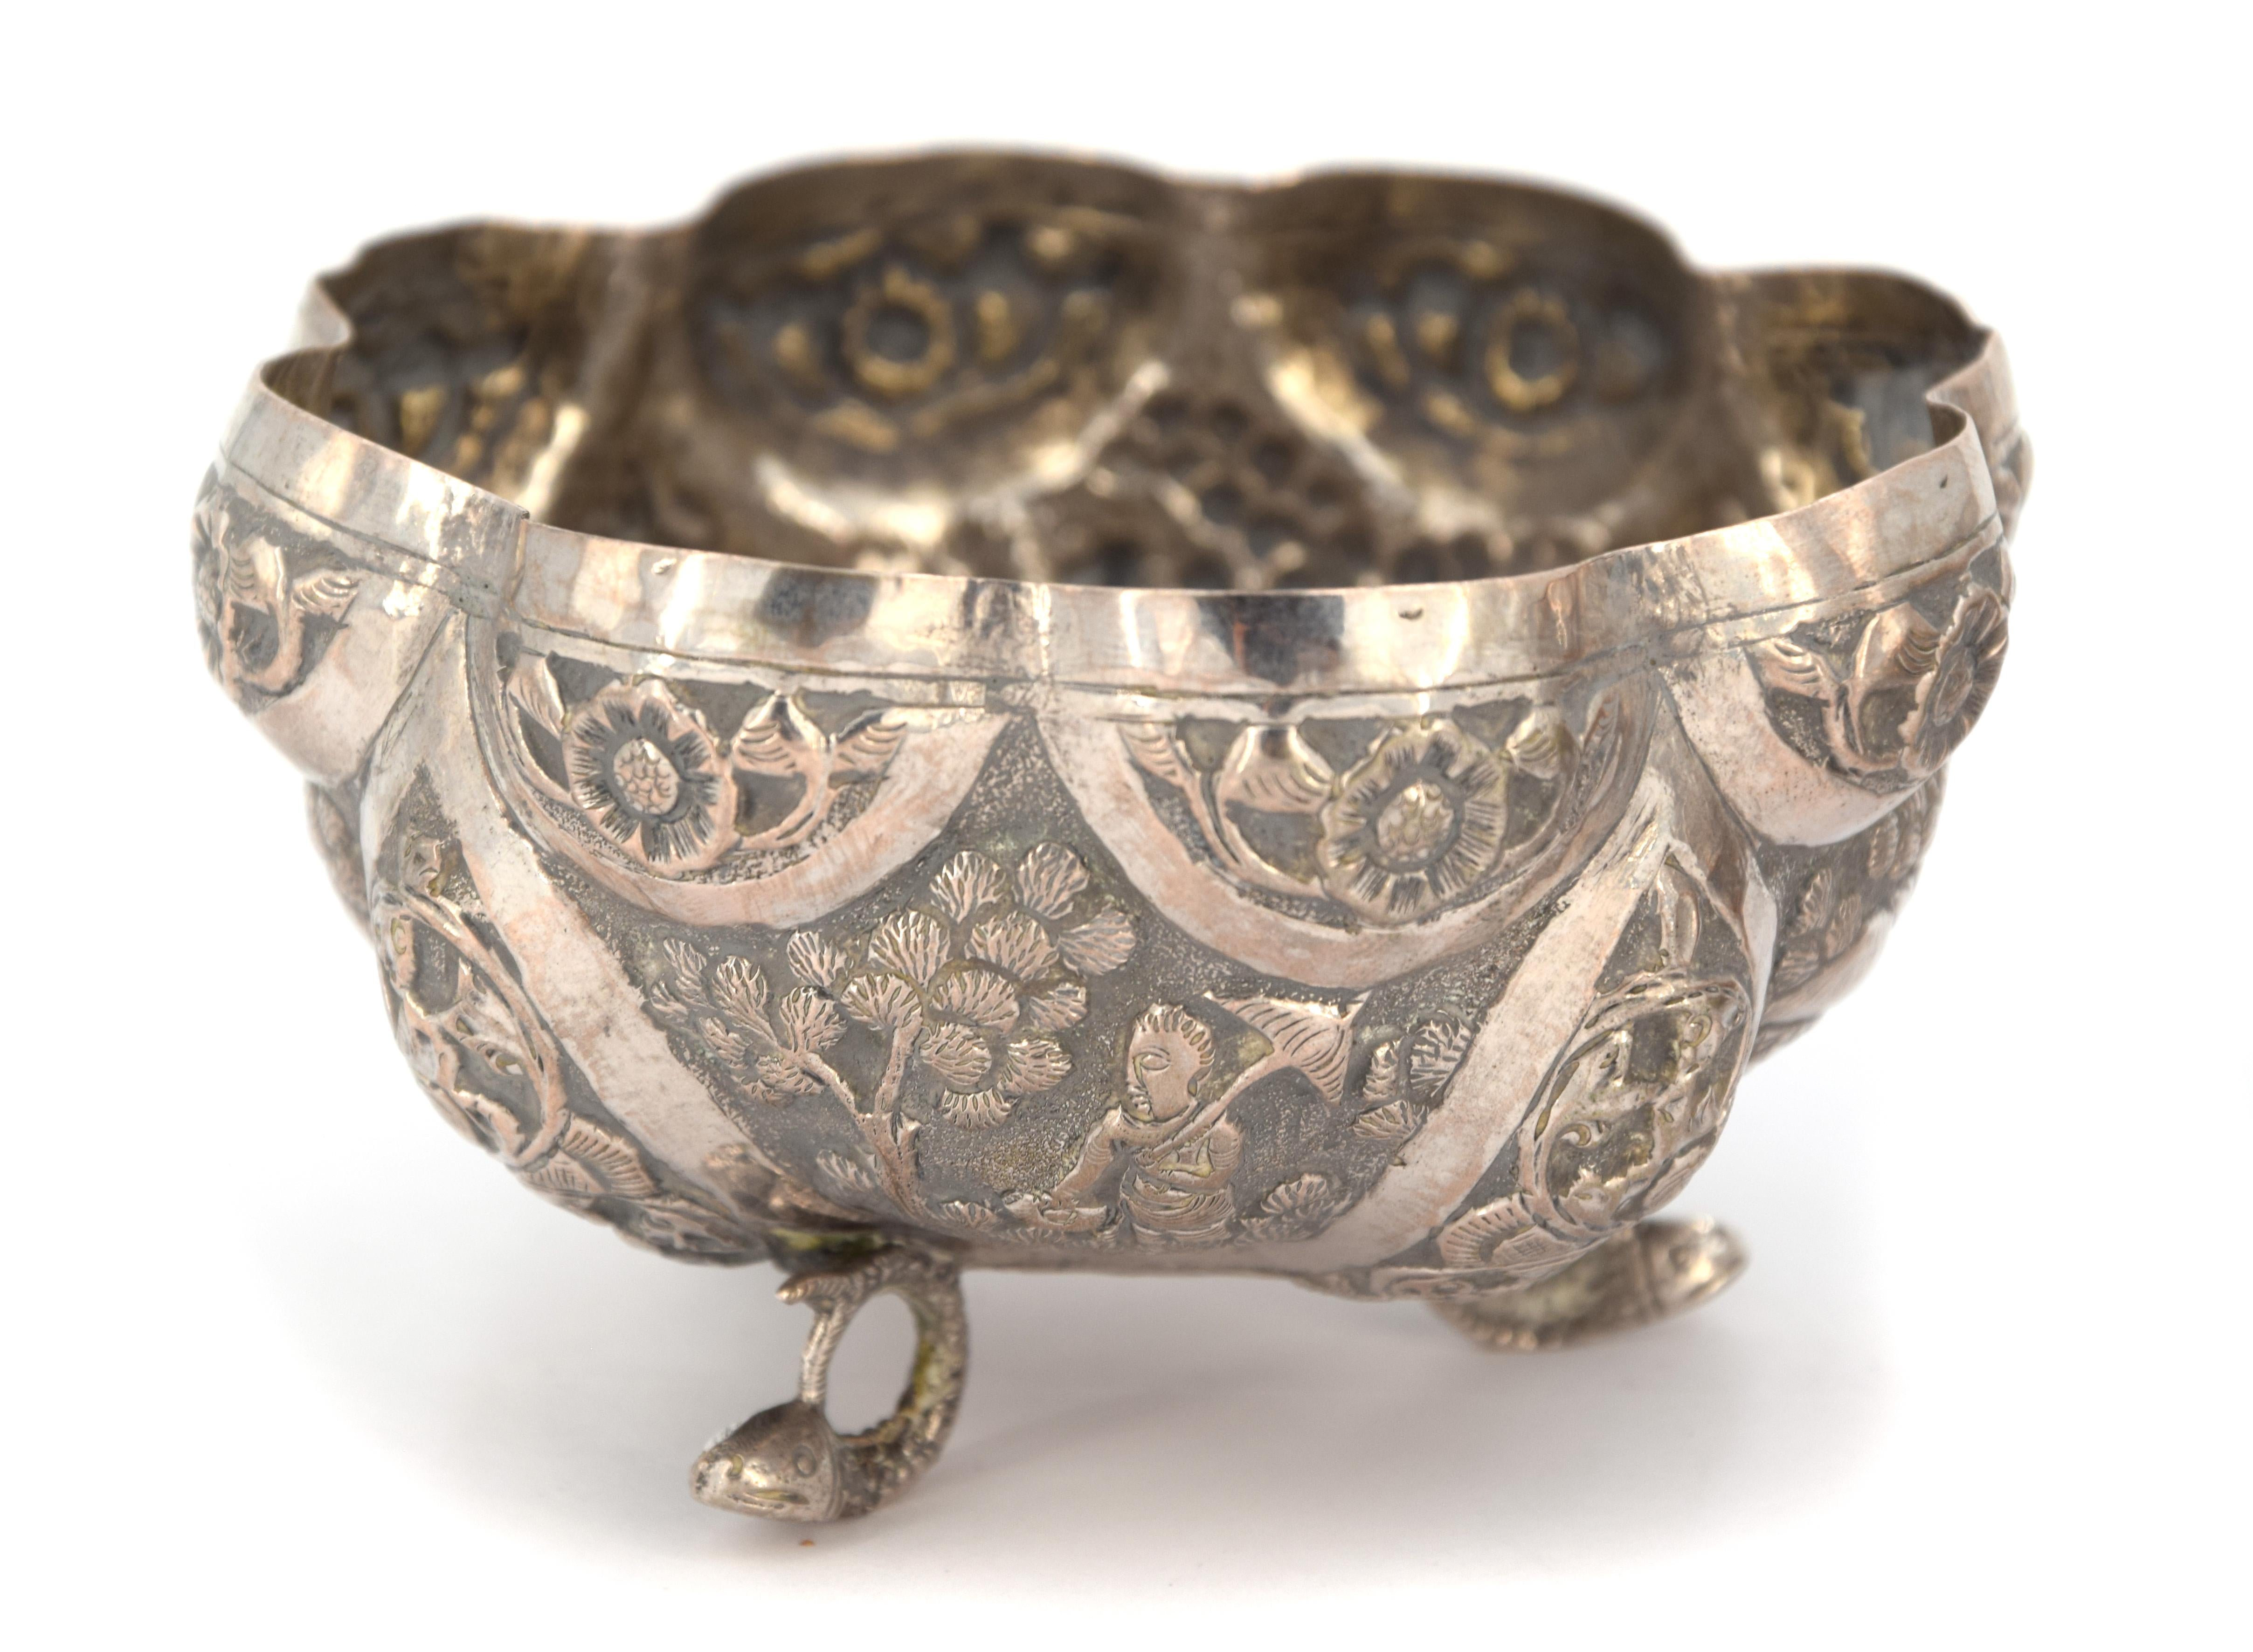 Tiny oriental curved round-shaped bowls in silver, entirely polished and hurled with floreal movifs and life scenes, supported by 3 fish-shaped feet.

This artwork is shipped from Italy. Under existing legislation, any artwork in Italy created